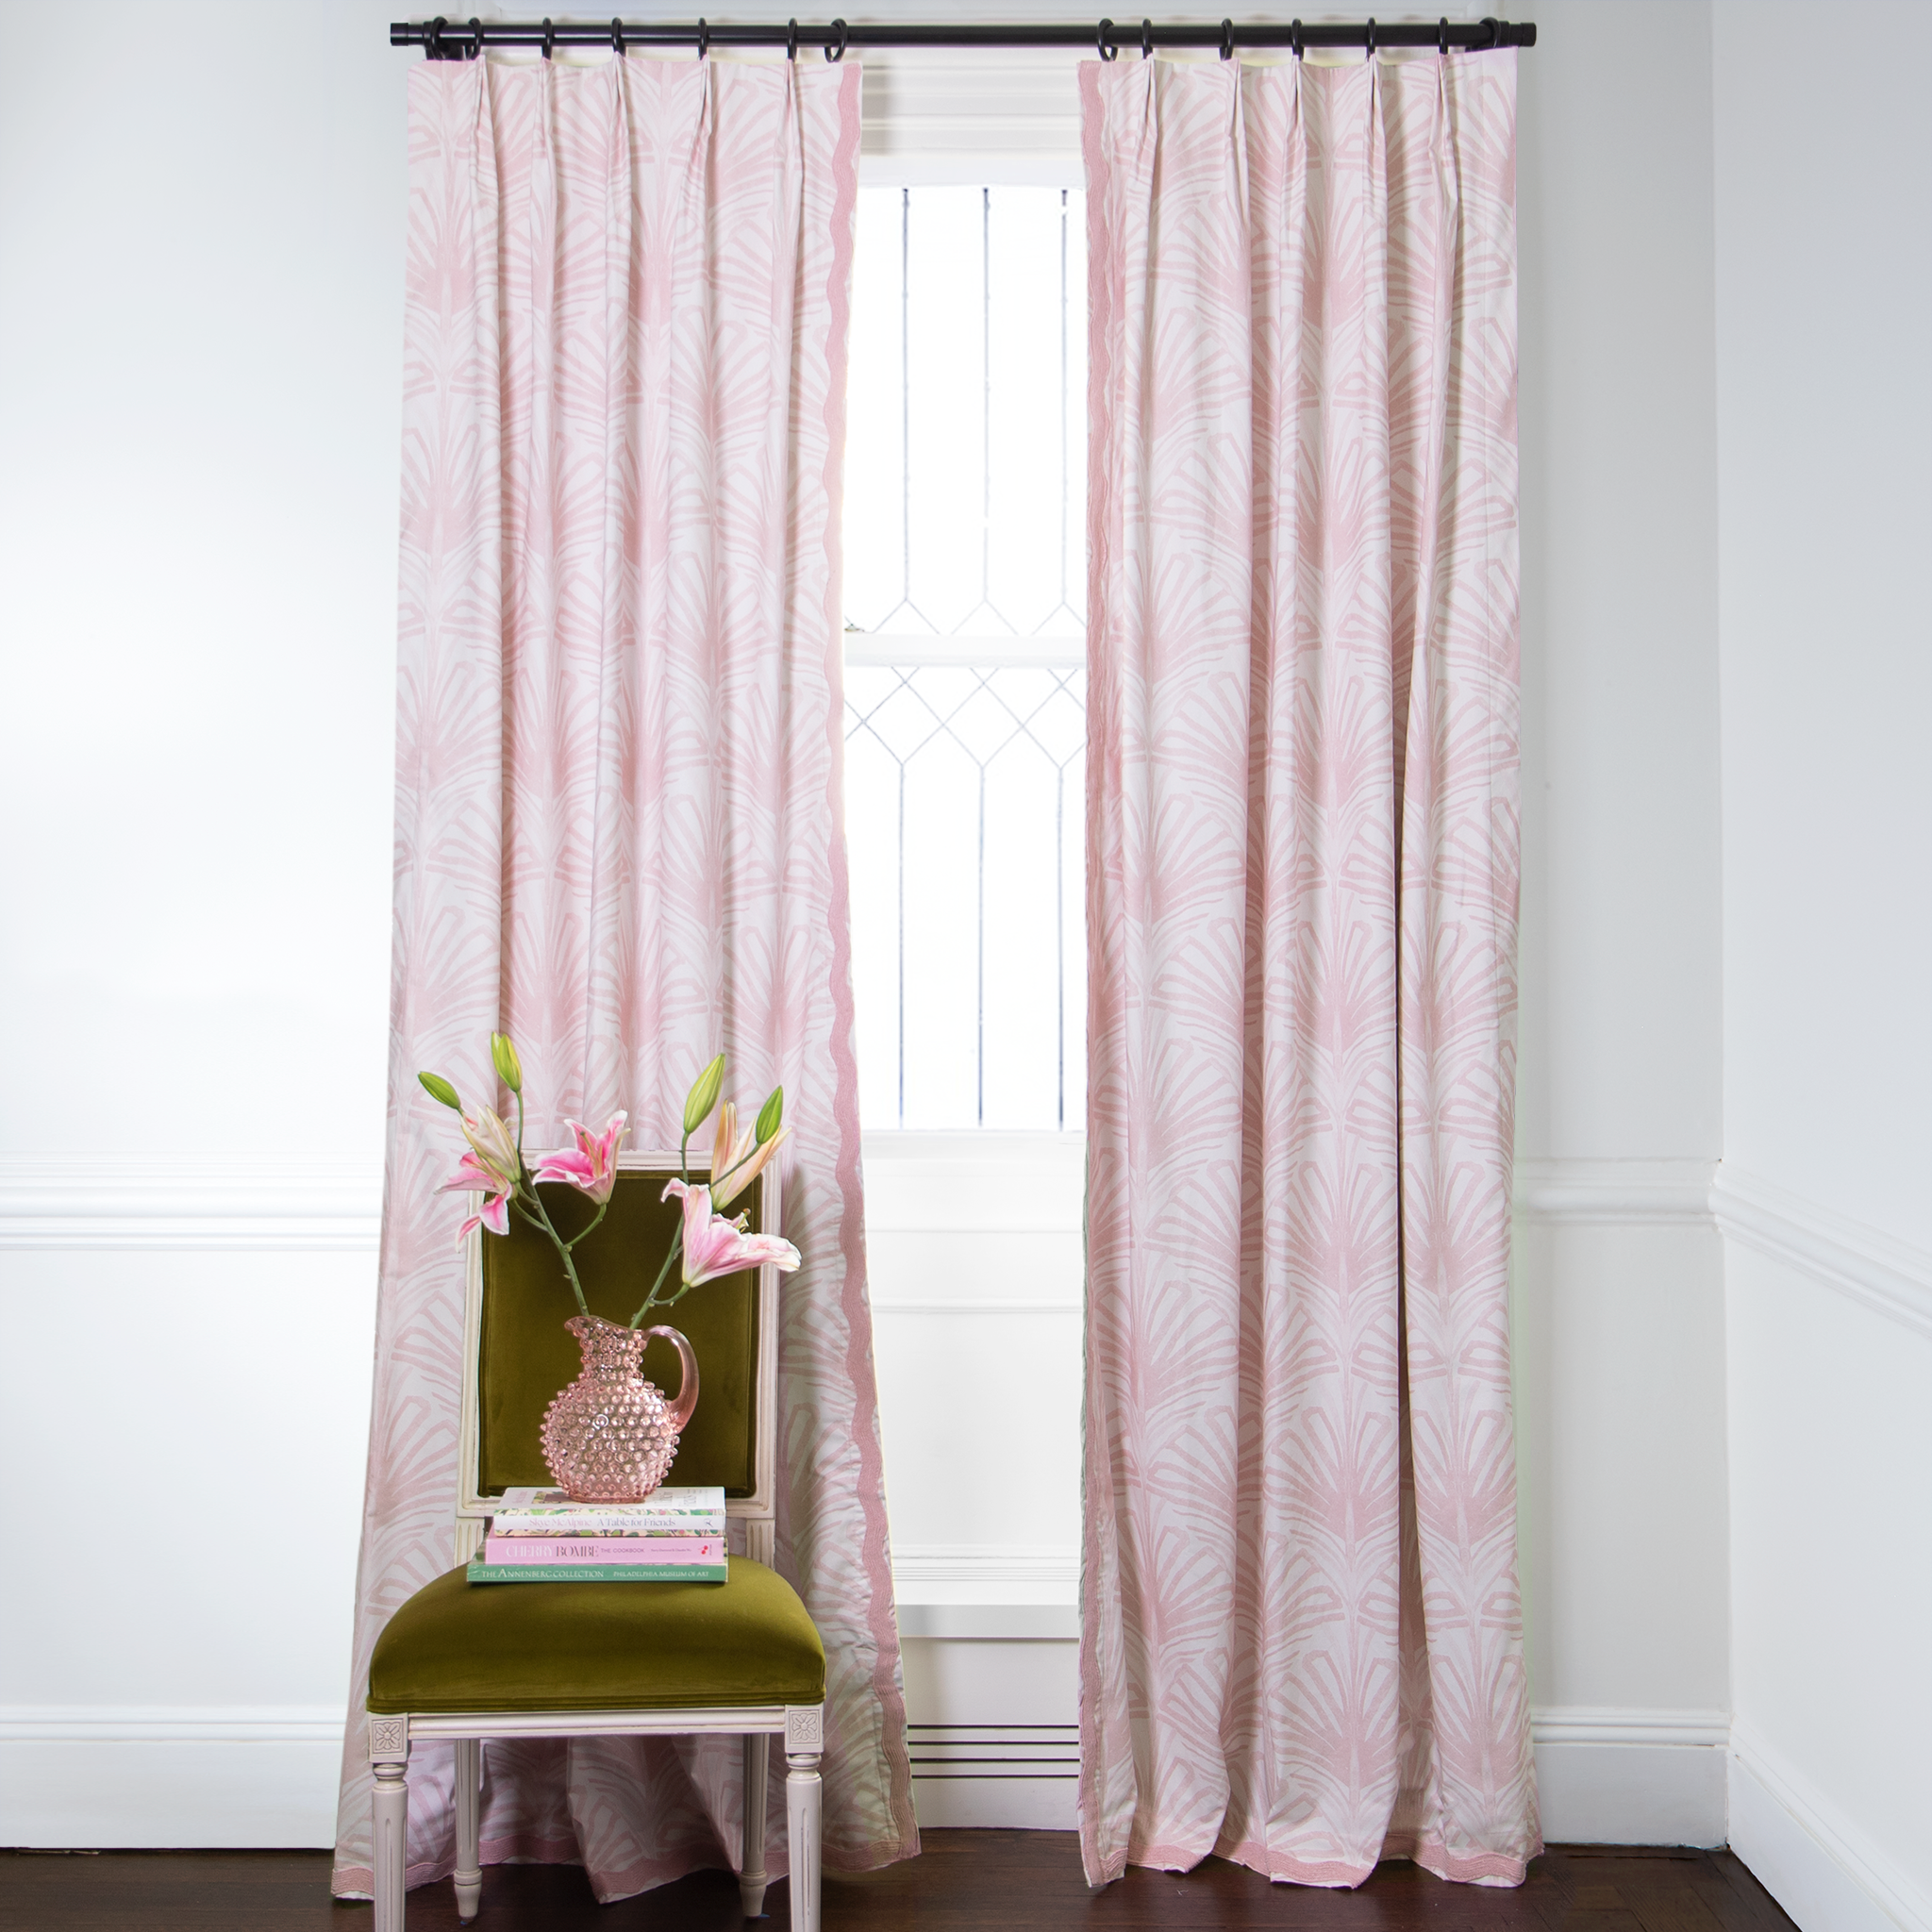 Rose Pink Palm Printed curtains on metal rod in front of an illuminated window with Green Moss chair with pink flowers in clear pink vase on top of stacked books